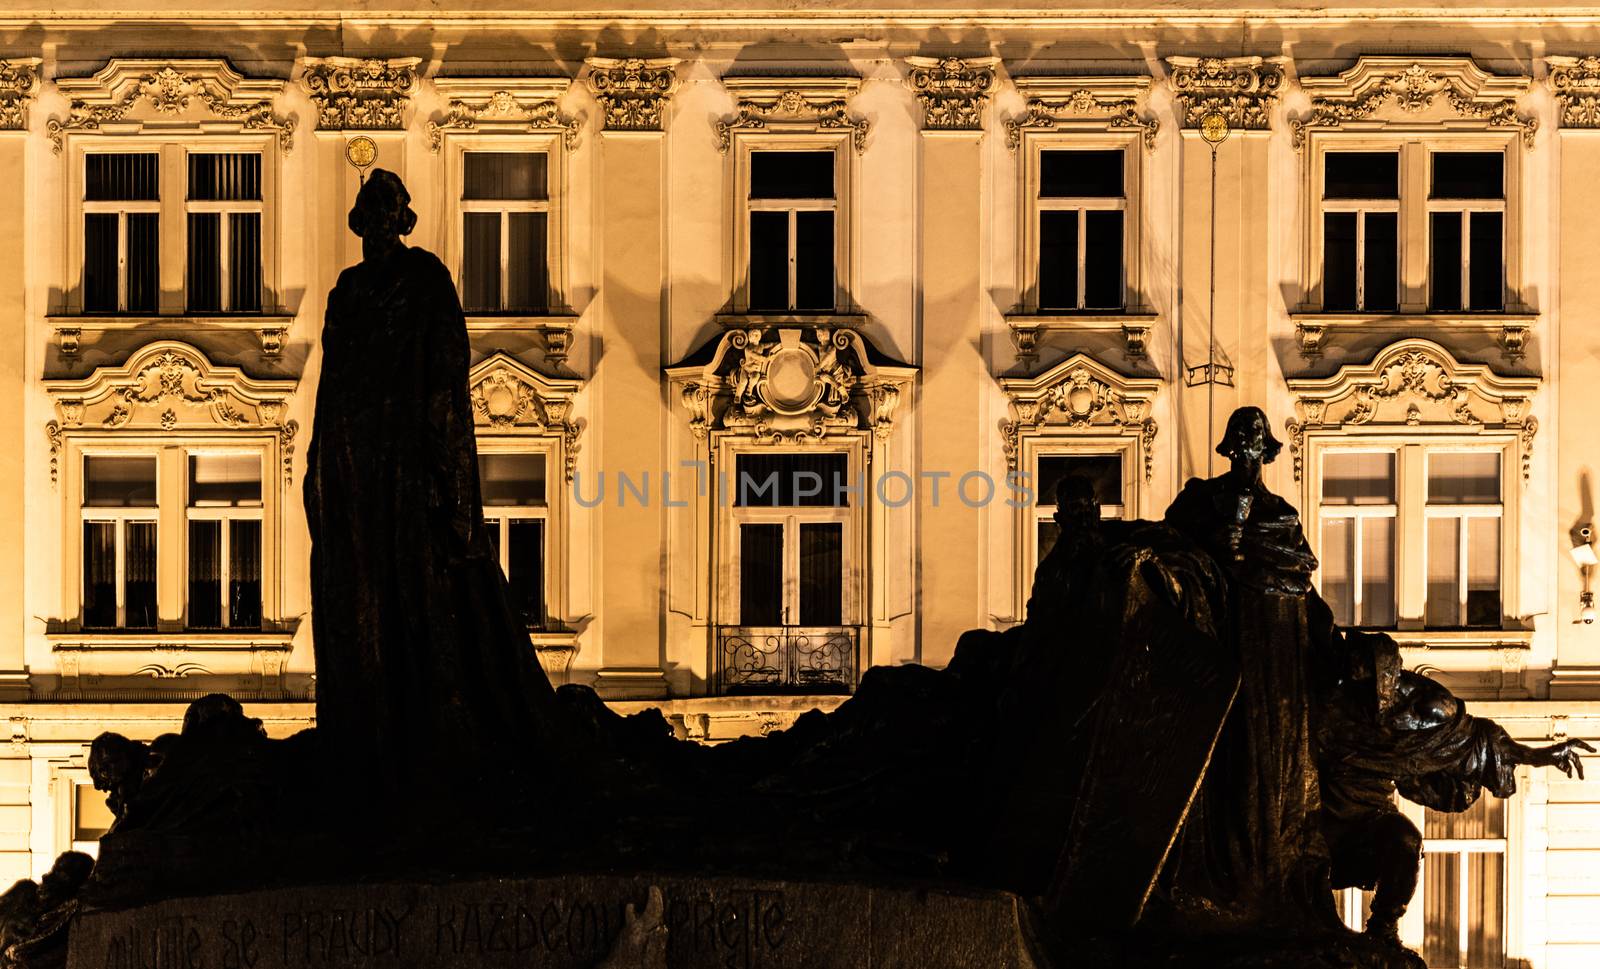 Silhouette of Jan Hus Memorial at Old Town Square by night. Prague, Czech Republic by pyty